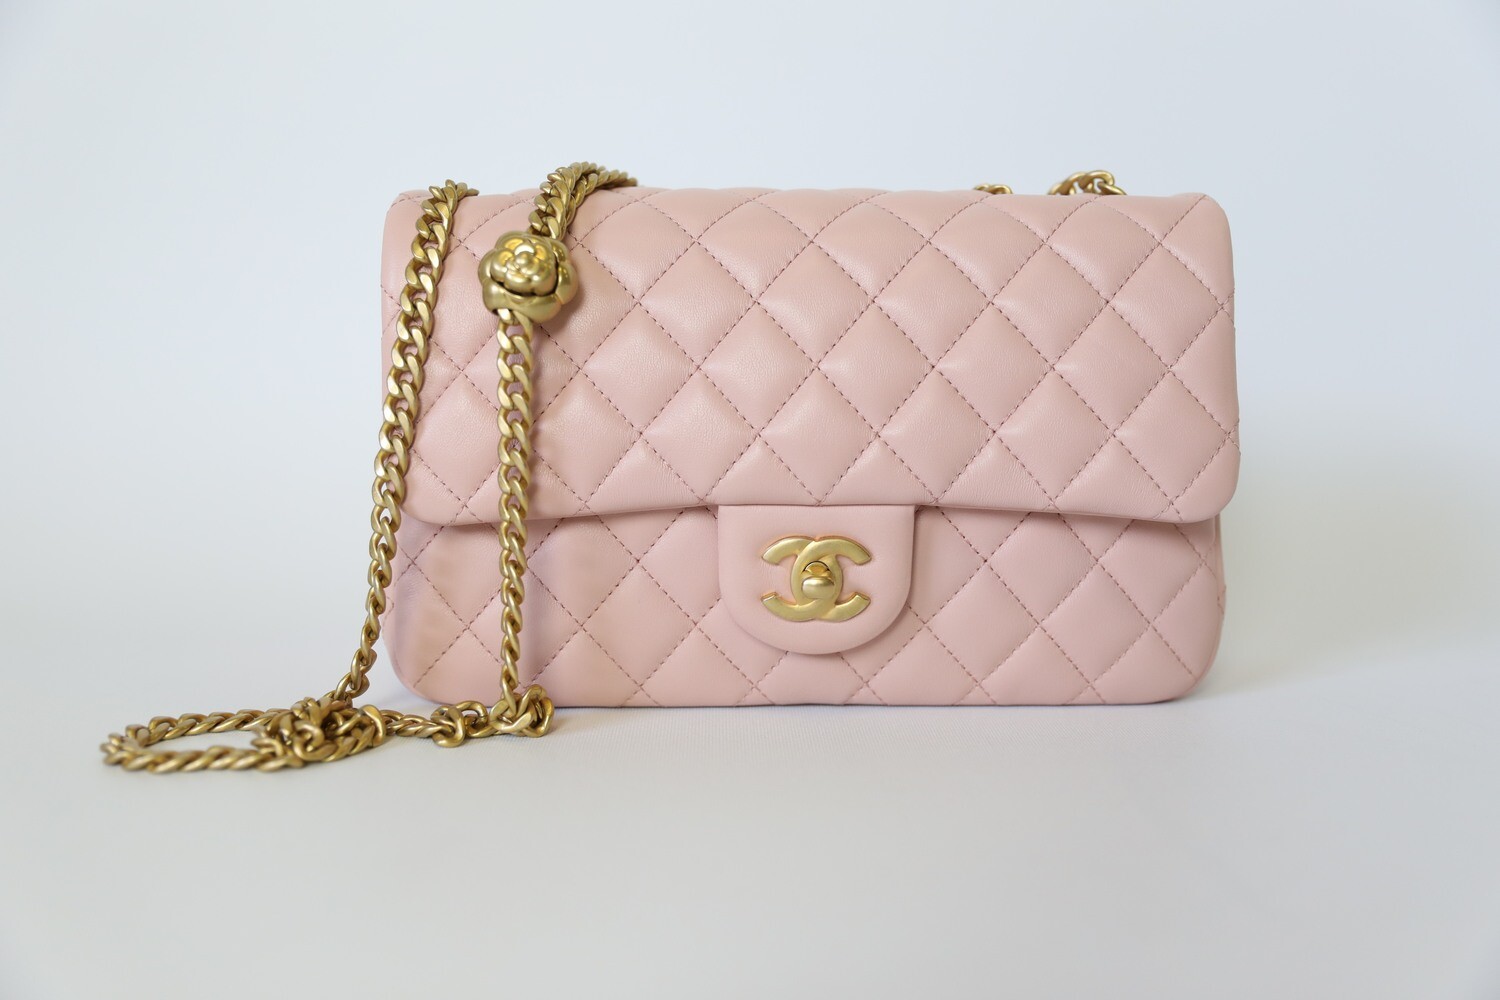 Chanel Camellia Flap Small, Pink Lambskin with Gold Hardware, New in Box  WA001